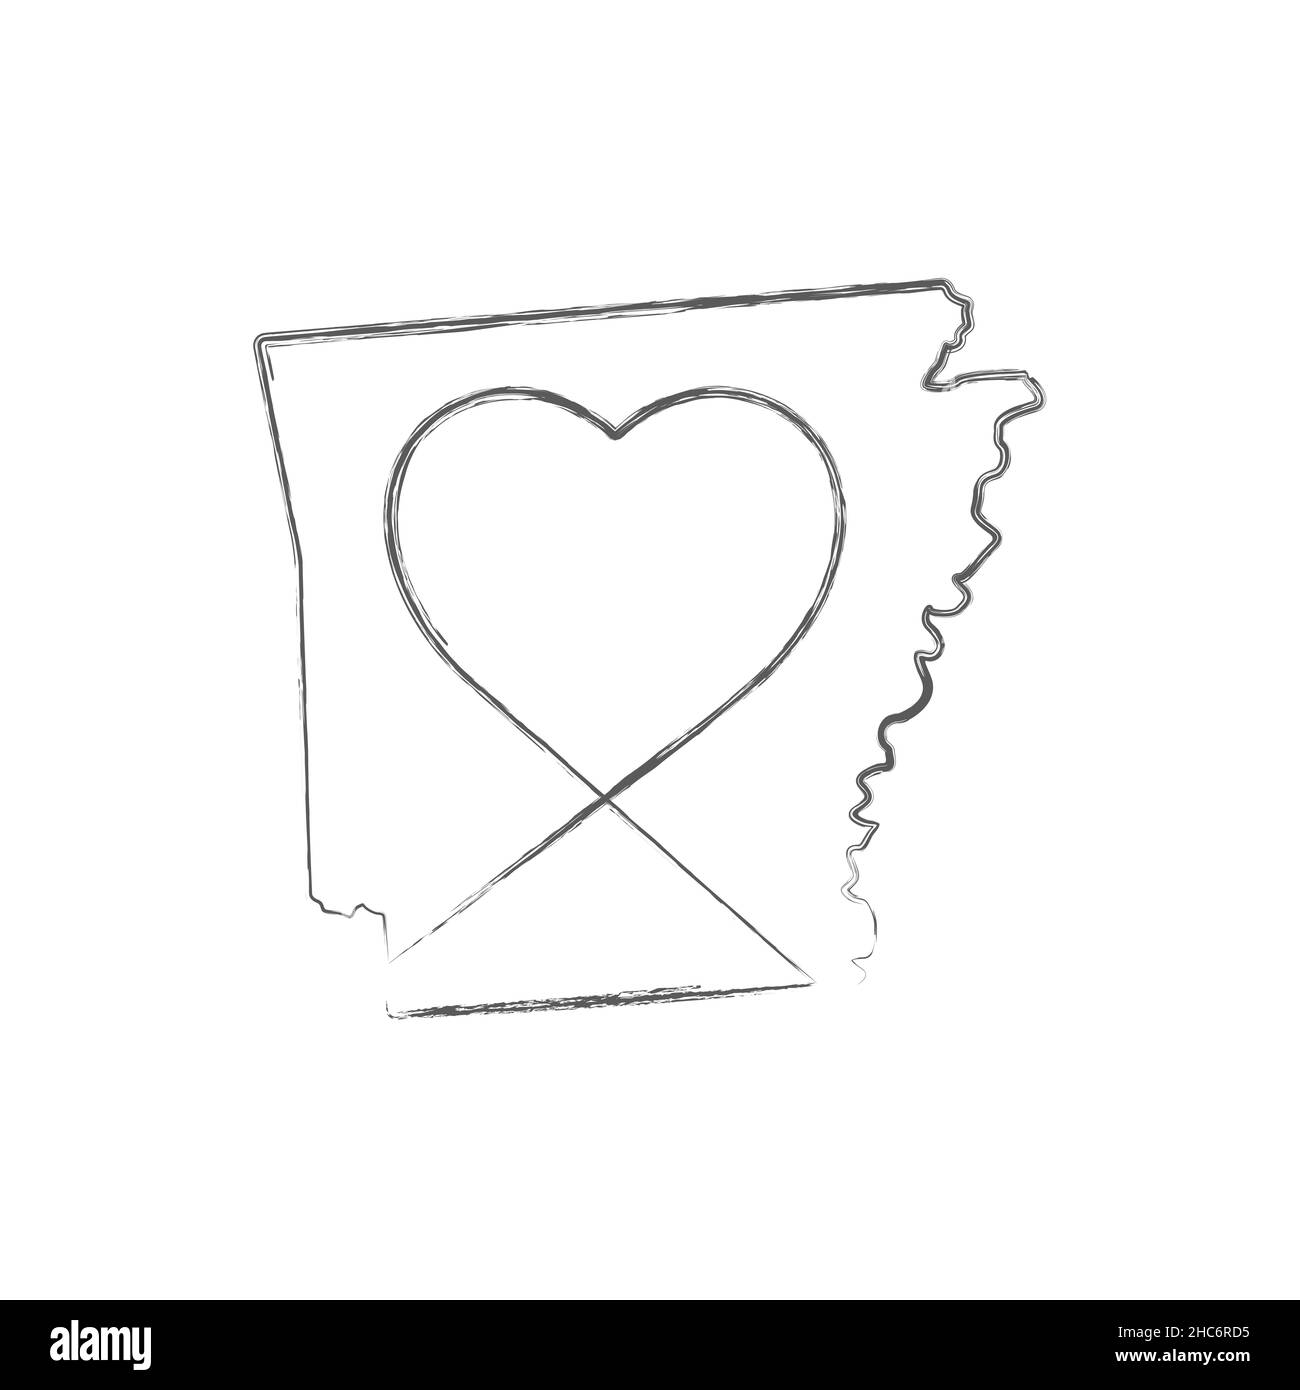 Arkansas US state hand drawn pencil sketch outline map with heart shape. Continuous line drawing of patriotic home sign. A love for a small homeland. Stock Photo